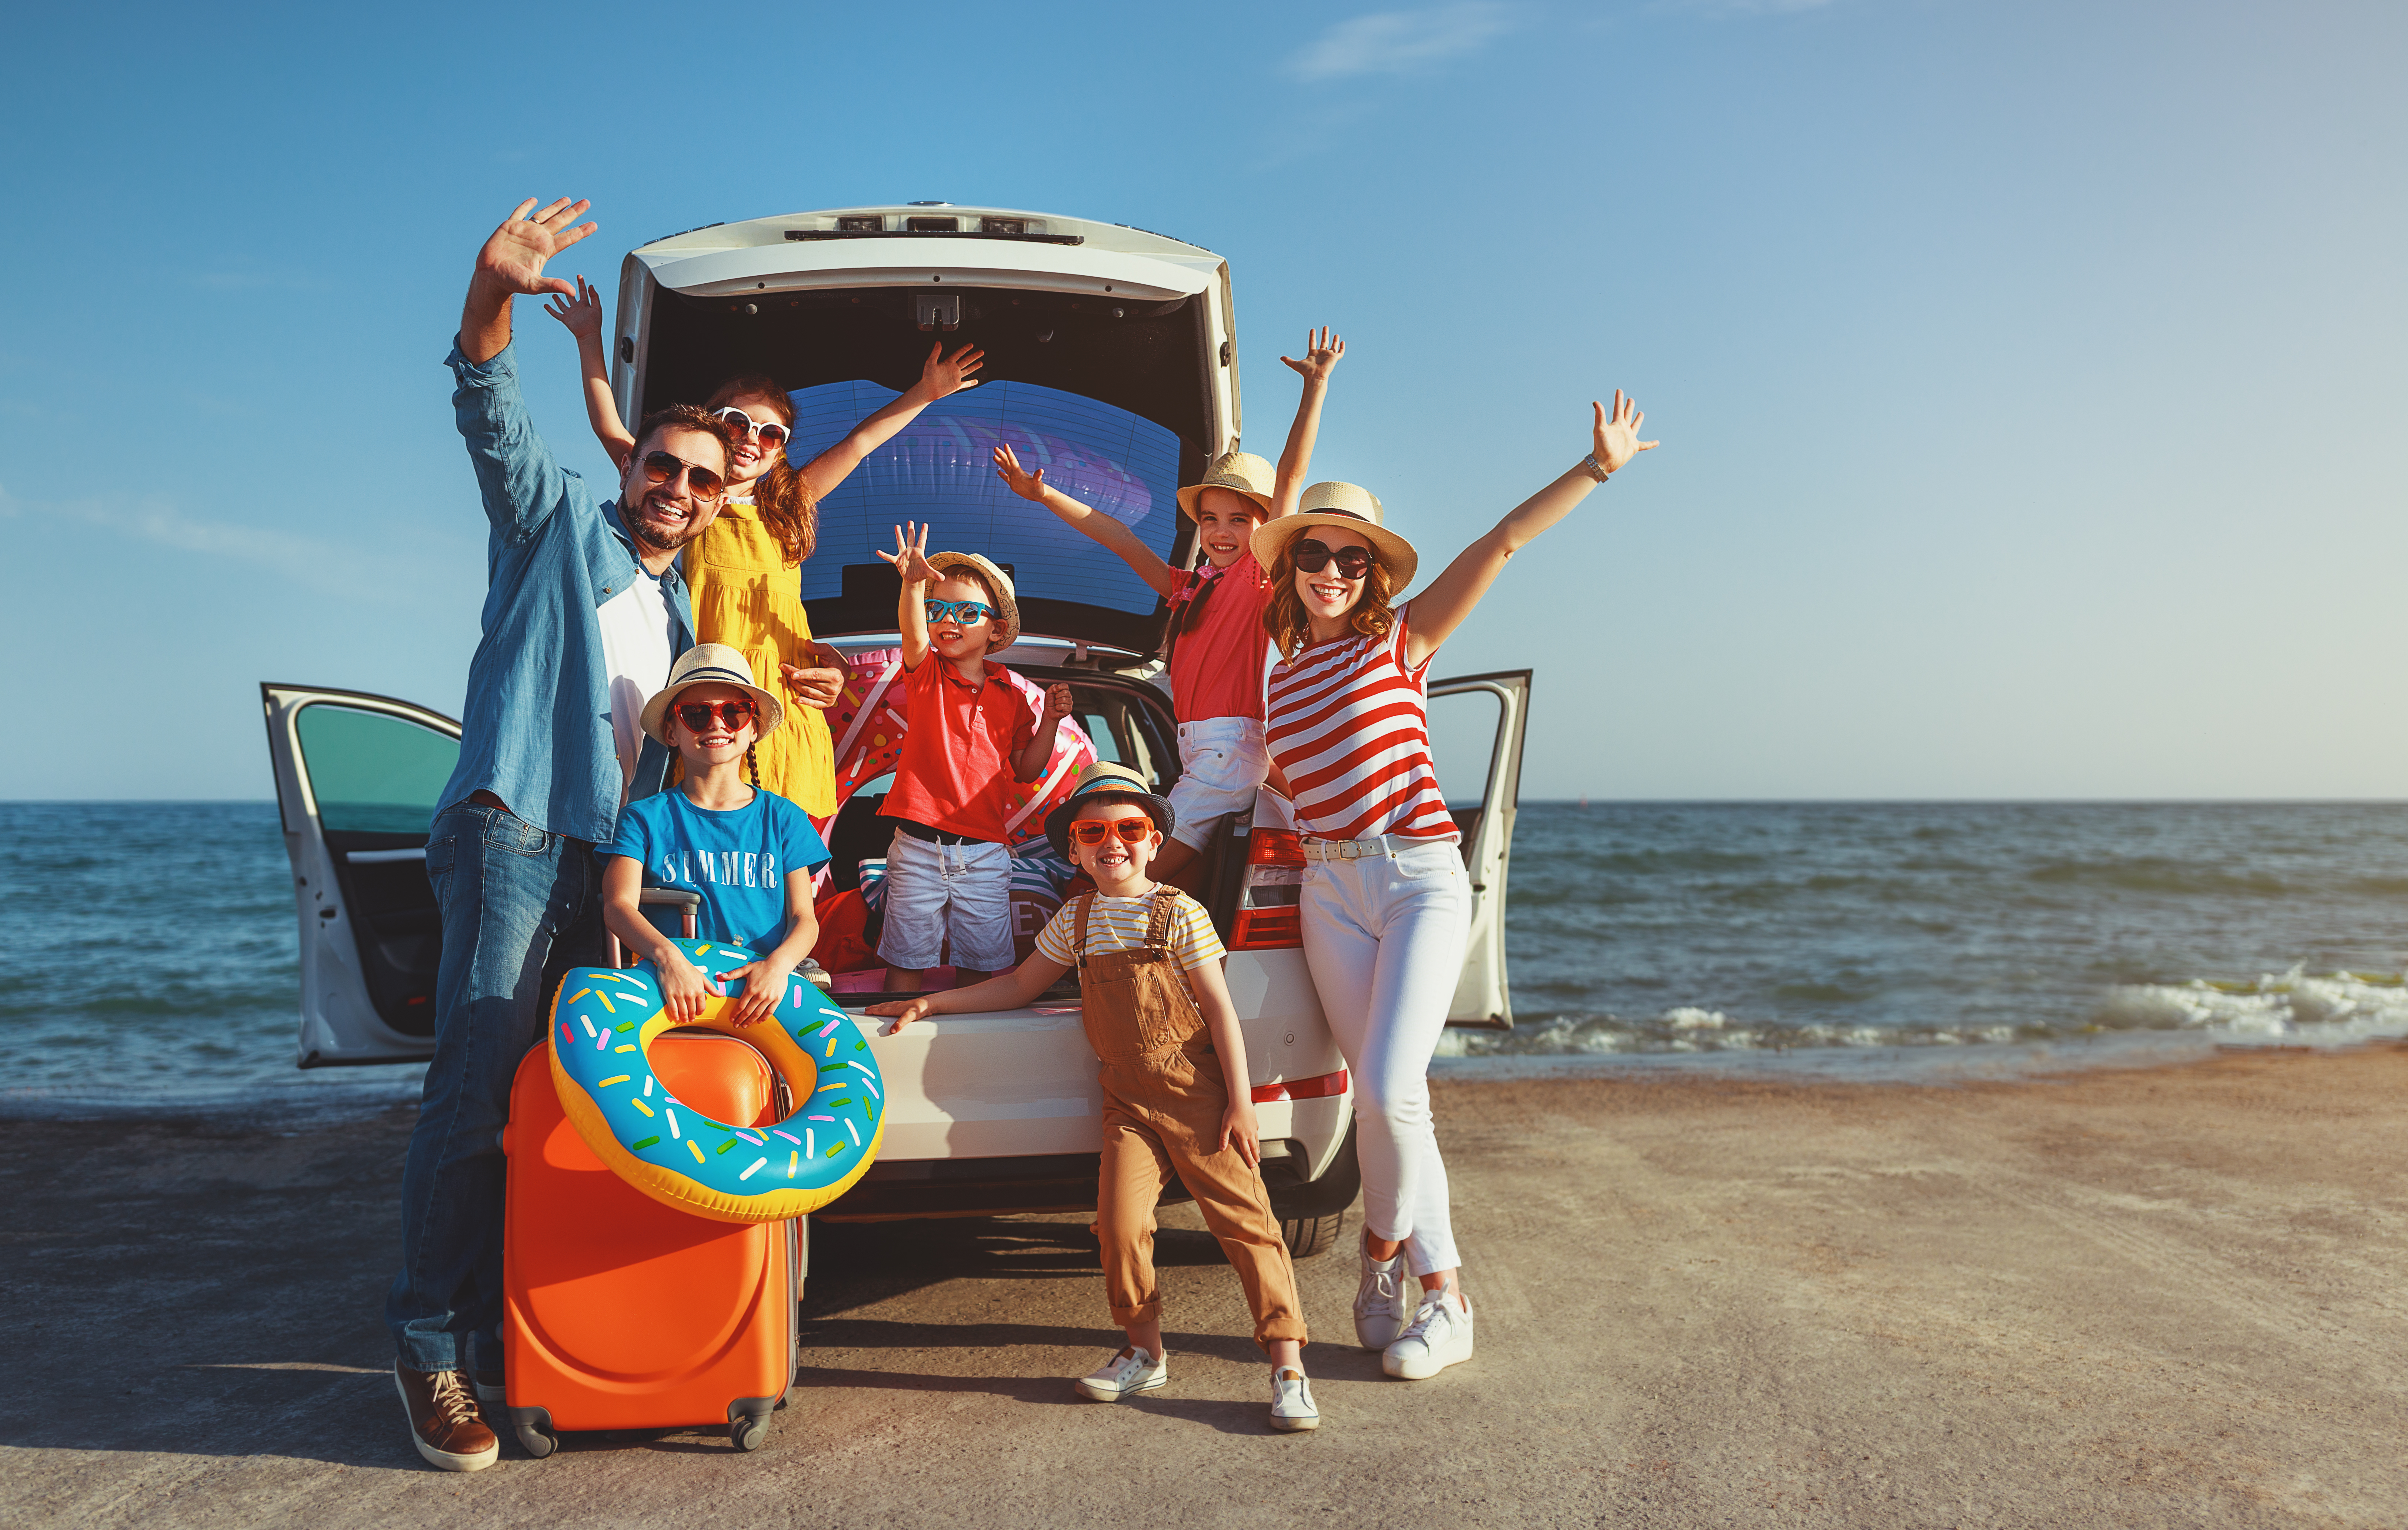 A family on vacation | Source: Shutterstock